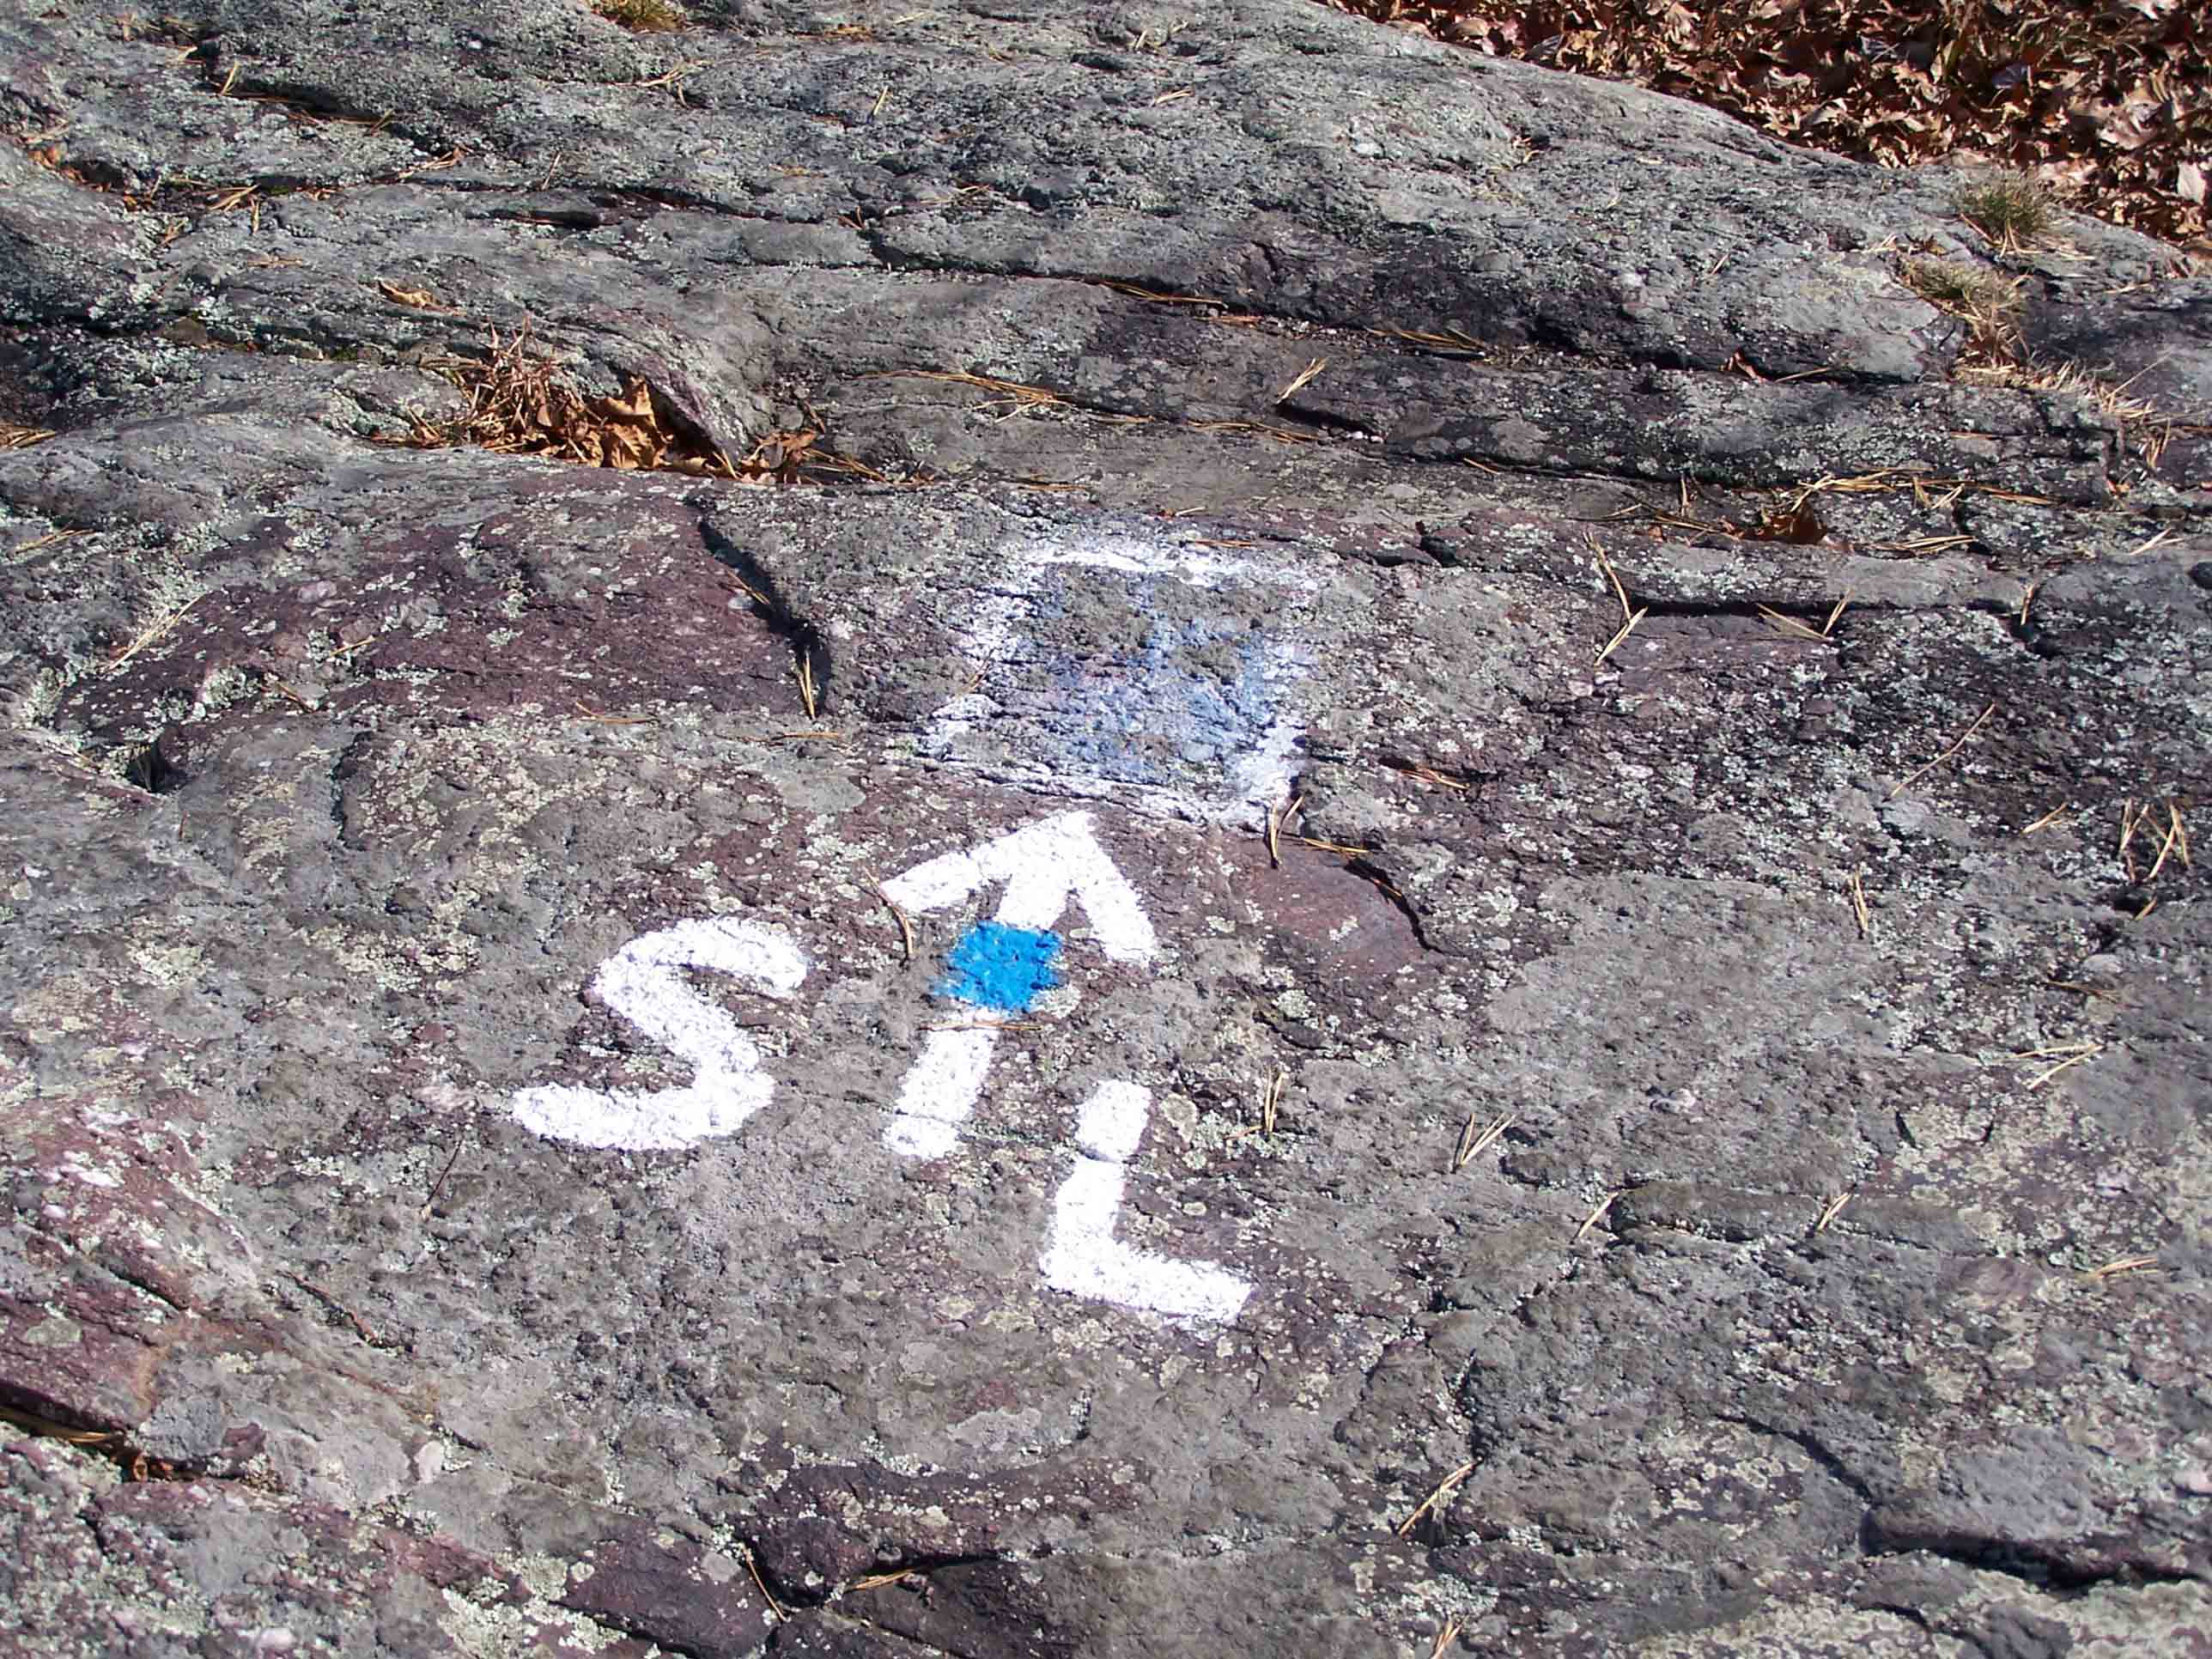 mm 0.0 - Blue blazed State Line Trail. Courtesy at@rohland.org